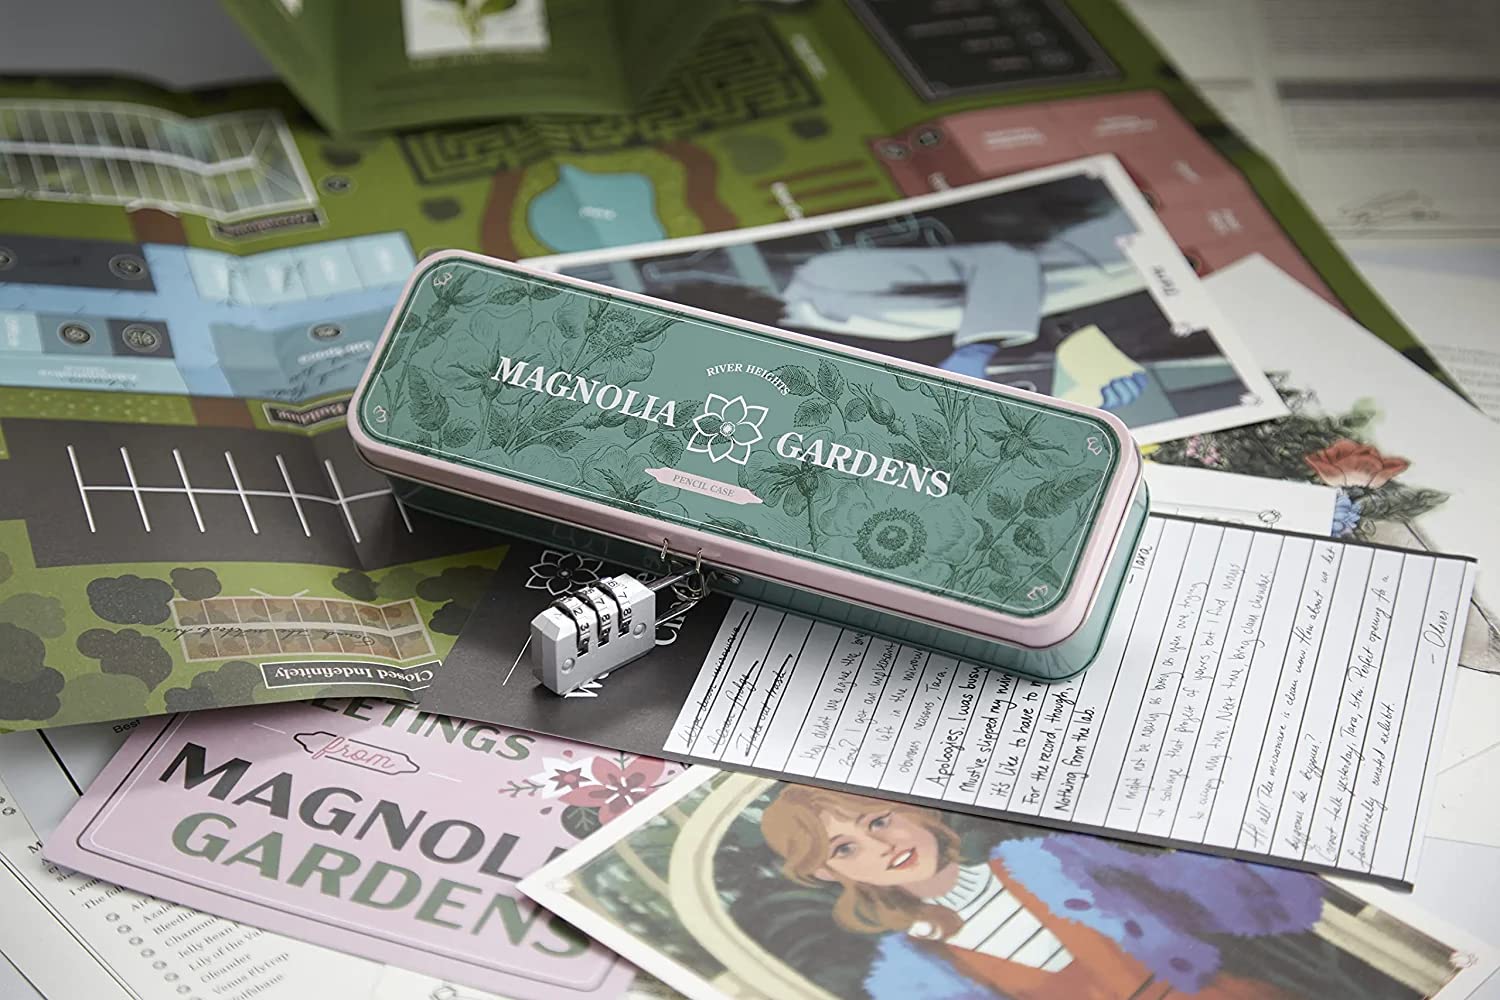 Hunt A Killer Mystery at Magnolia Gardens - Solve a Nancy Drew Mystery - for Family Game Night with Documents & Puzzles - Murder Mystery Game for Adults & Kids - Solve Crimes at Date Night - Ages 14+